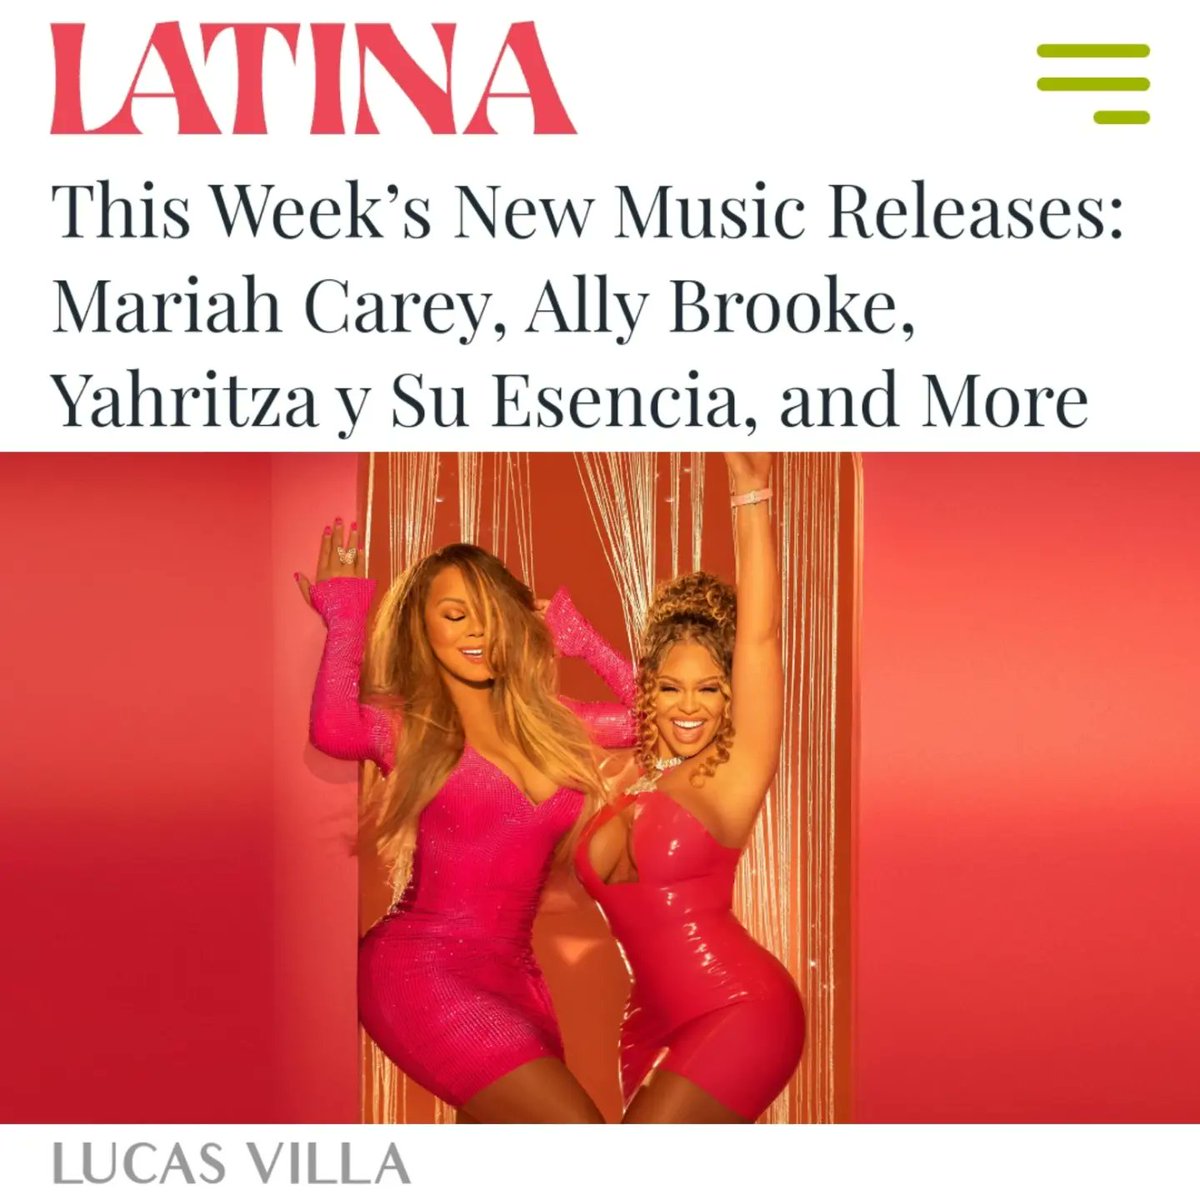 For last week's @latina new music picks, we have the return of @mariahcarey with @Latto, @_morapr's new album, the debut of Mexican group @officialyahri14 + @ferxxo4, @allybrooke, @PauloLondra & more 🎧 latina.com/this-weeks-new…